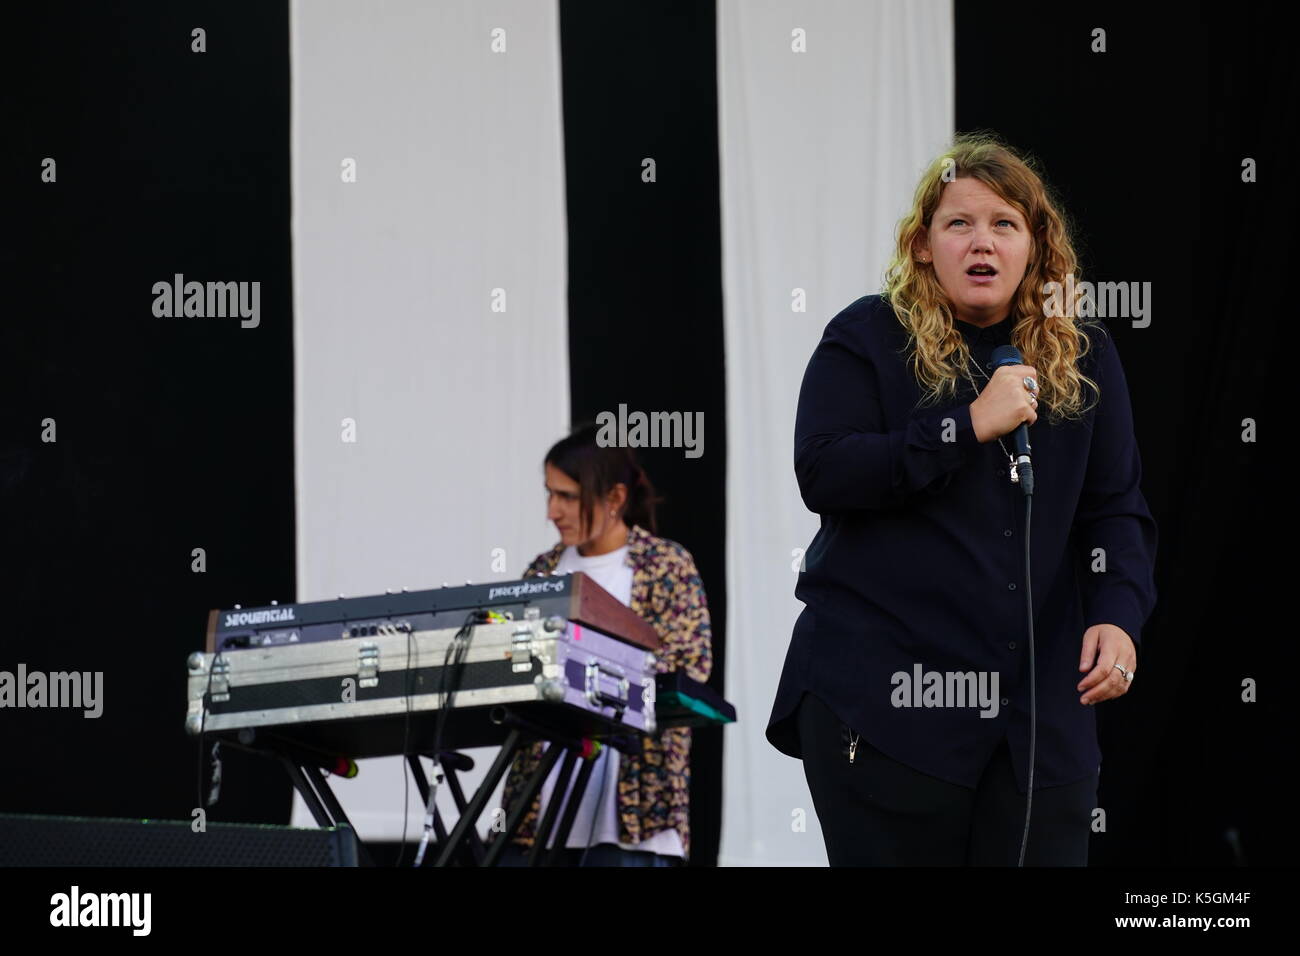 London, UK. 9th September, 2017. Kate Tempest performing live on the Main Stage at the 2017 OnBlackheath Festival in Blackheath, London. Photo date: Saturday, September 9, 2017. Photo credit should read: Roger Garfield/Alamy Live News Stock Photo